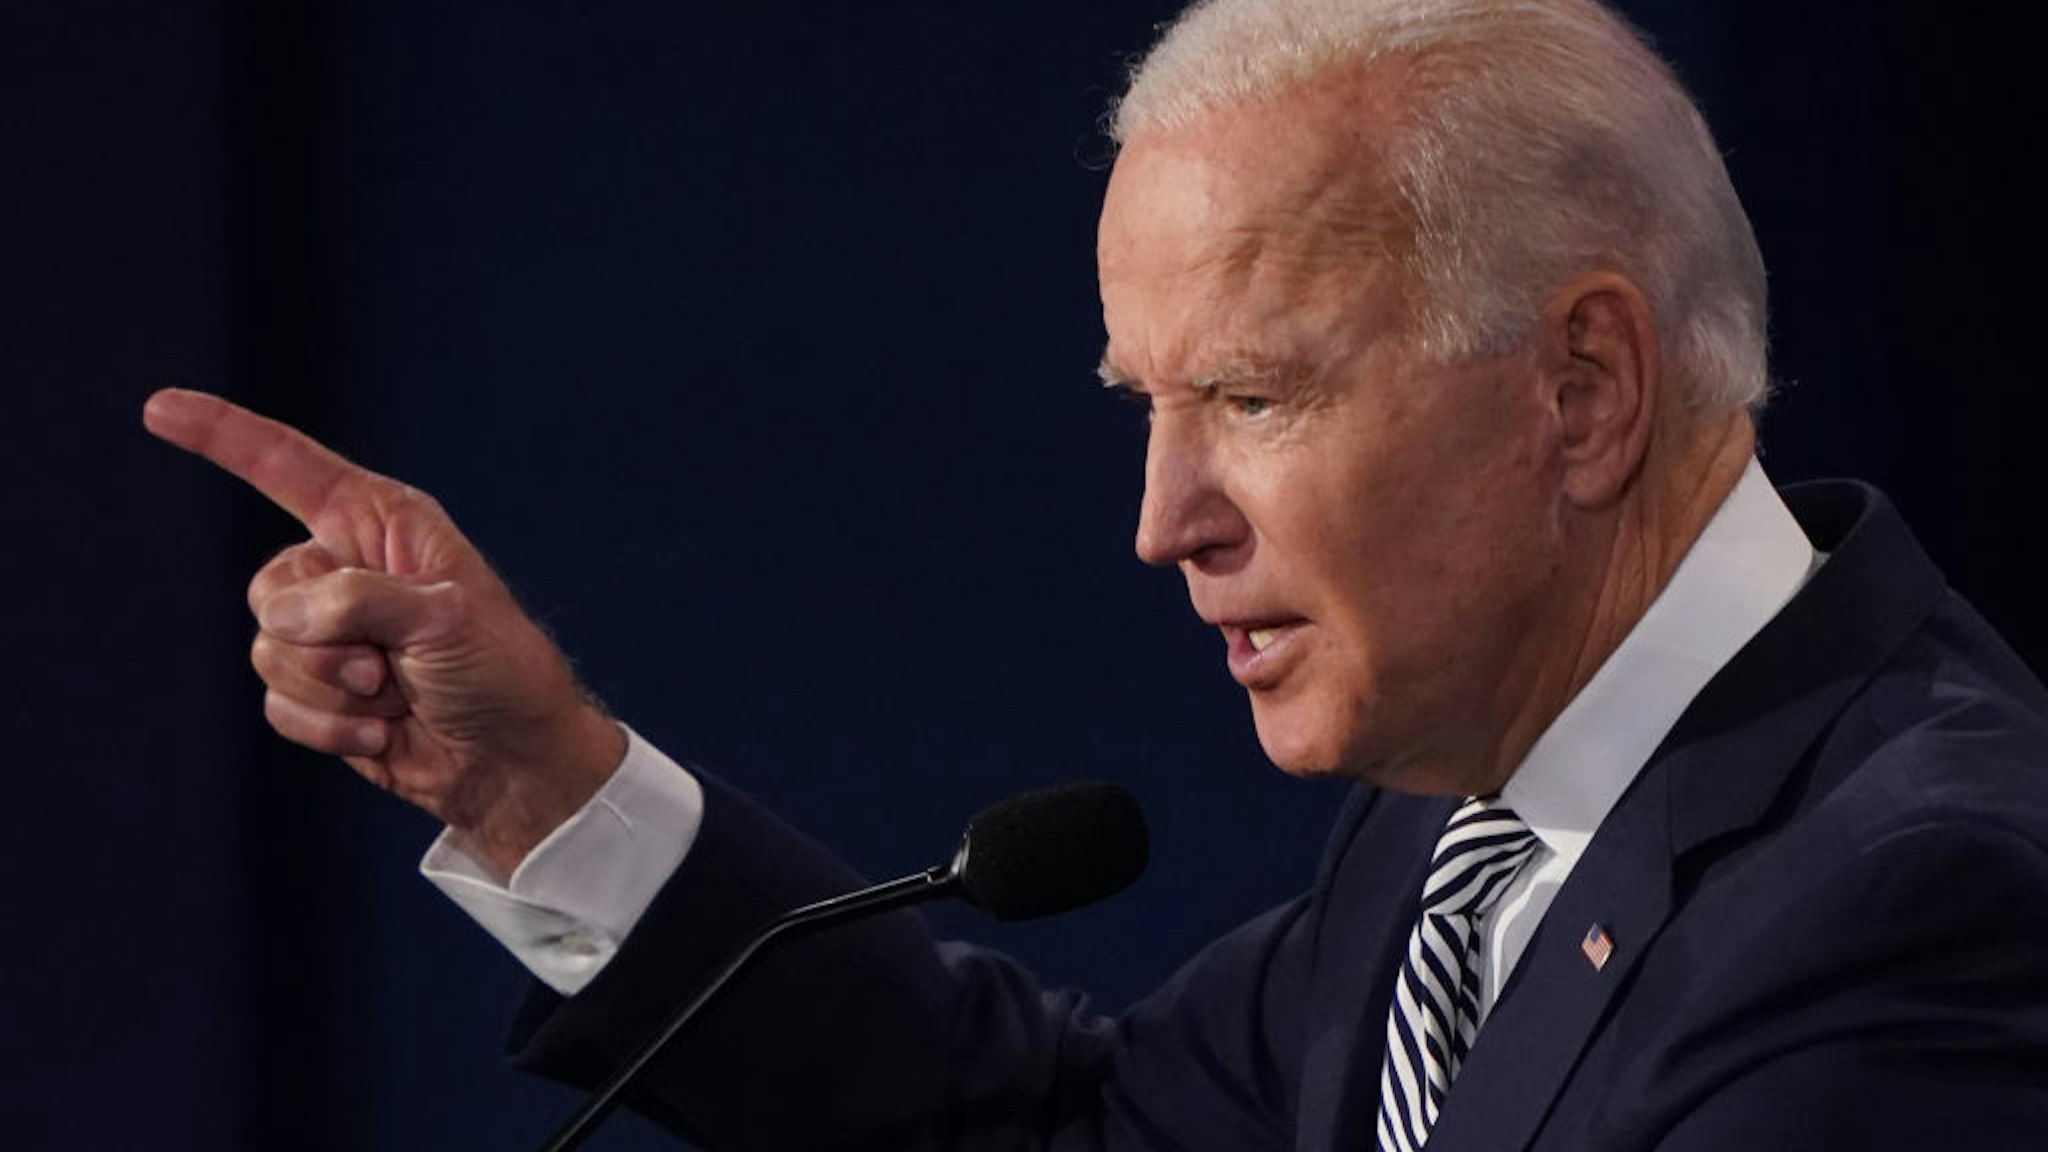 Joe Biden, 2020 Democratic presidential nominee, speaks during the first U.S. presidential debate hosted by Case Western Reserve University and the Cleveland Clinic in Cleveland, Ohio, U.S., on Tuesday, Sept. 29, 2020. Trump and Biden kick off their first debate with contentious topics like the Supreme Court and the coronavirus pandemic suddenly joined by yet another potentially explosive question -- whether the president ducked paying his taxes. Photographer: Kevin Dietsch/UPI/Bloomberg